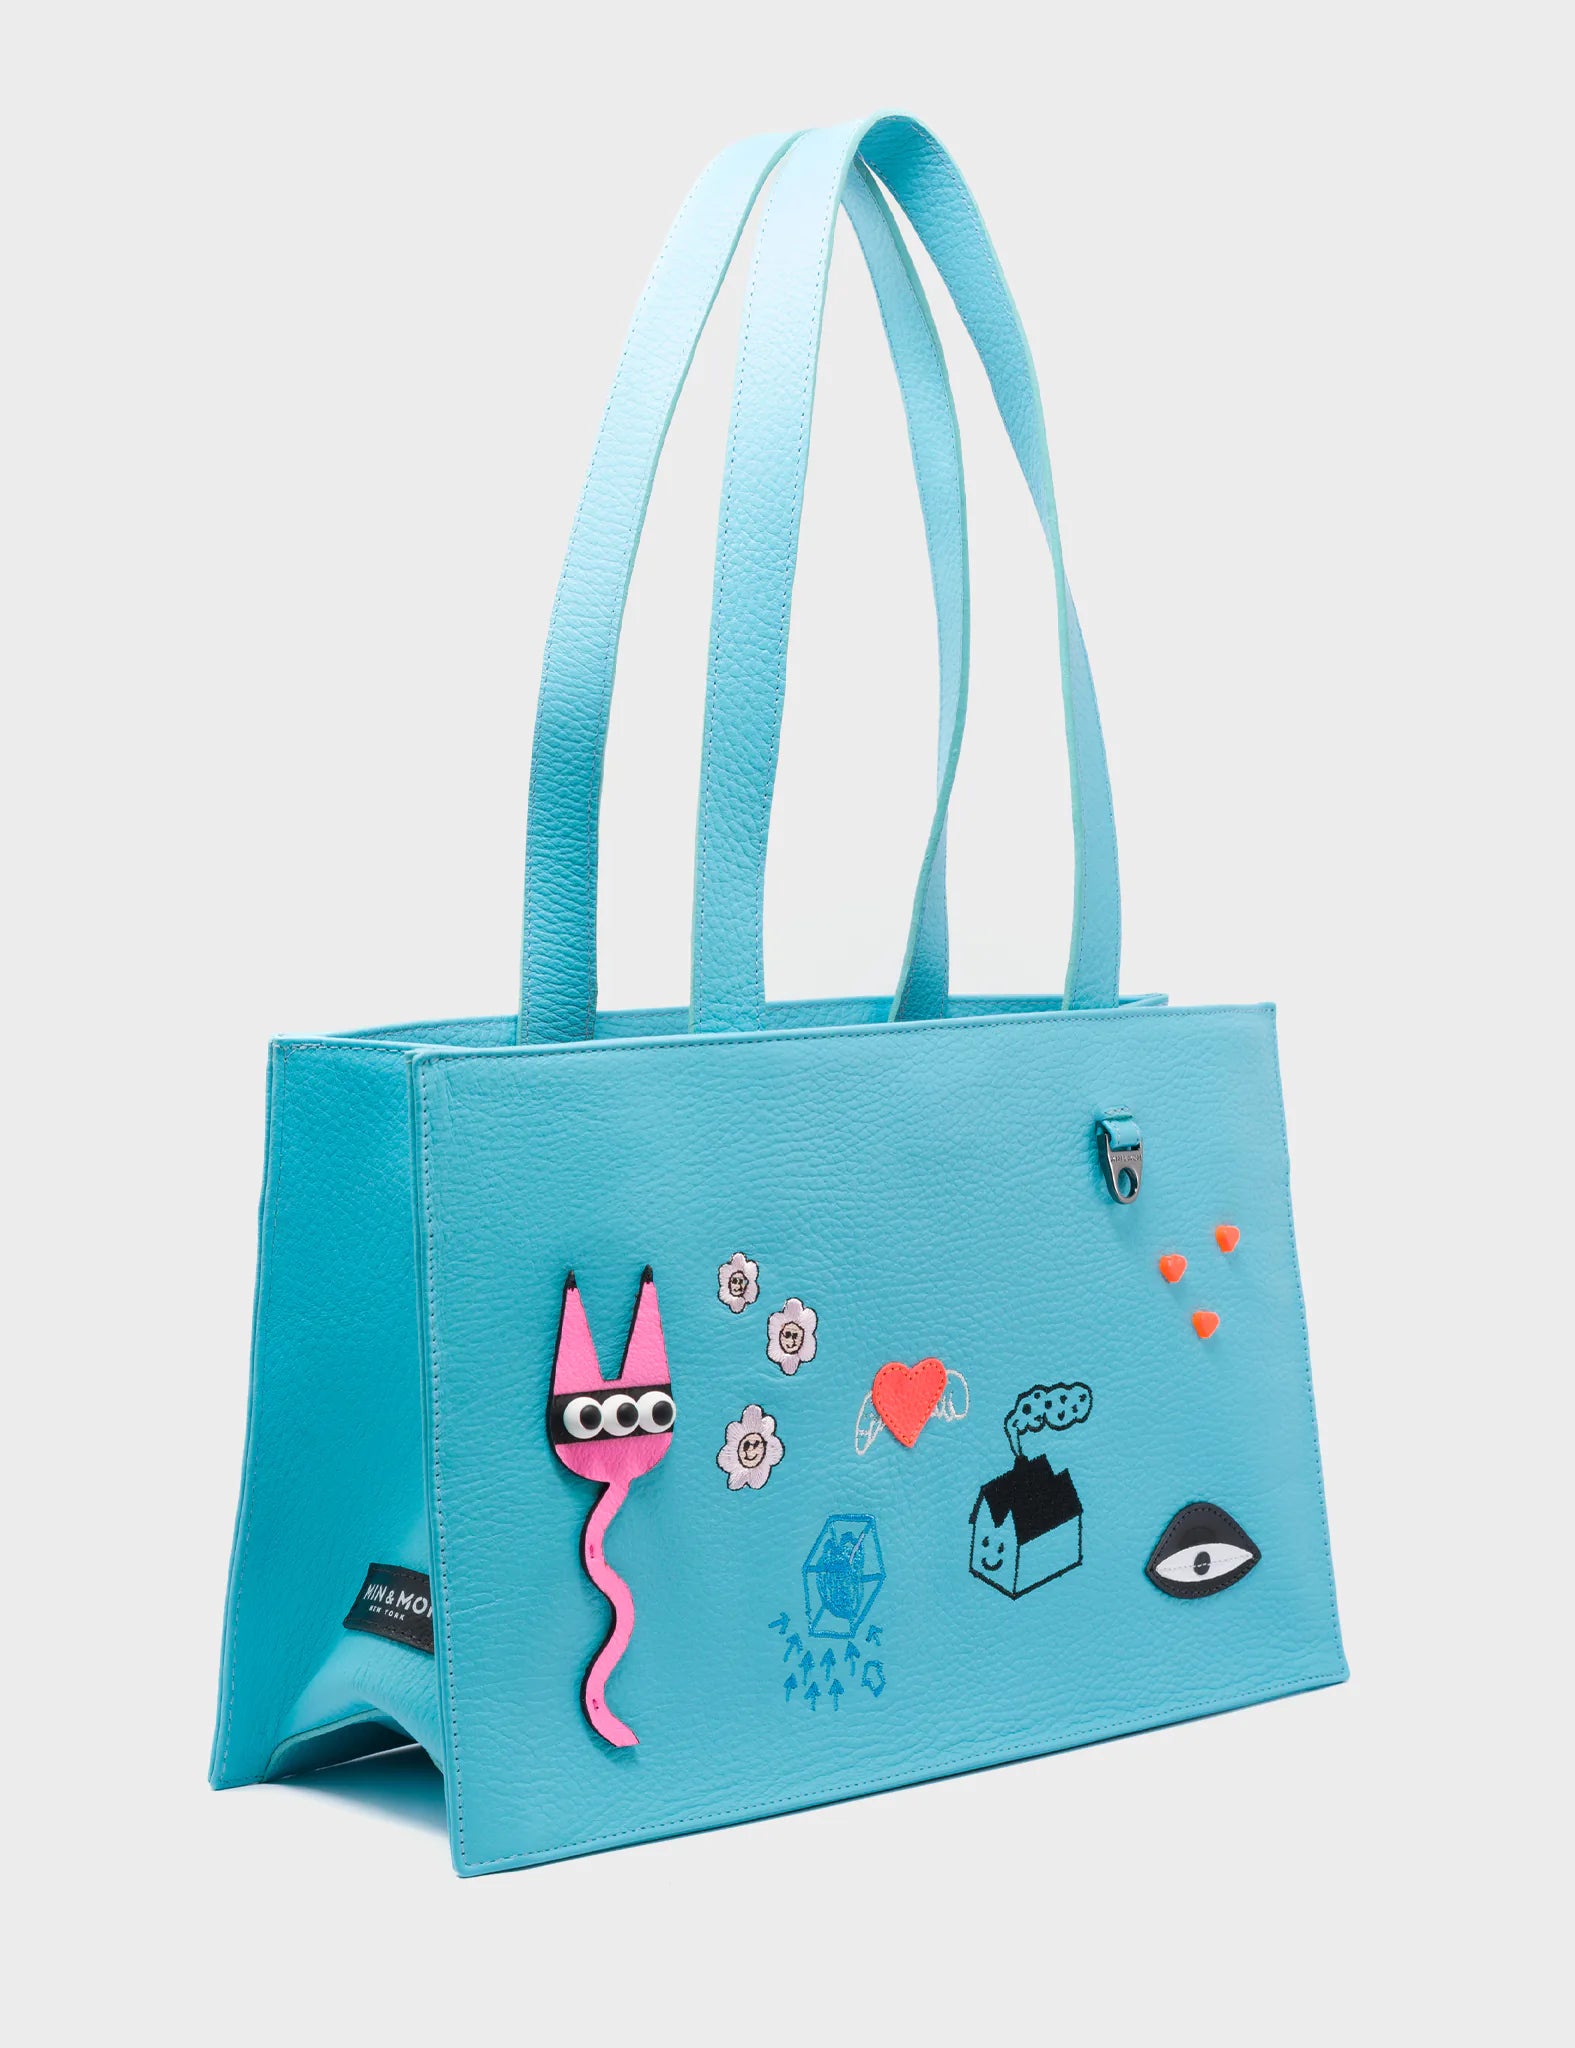 Marko Small Cyan Leather Tote Bag - Urban Doodles Applique